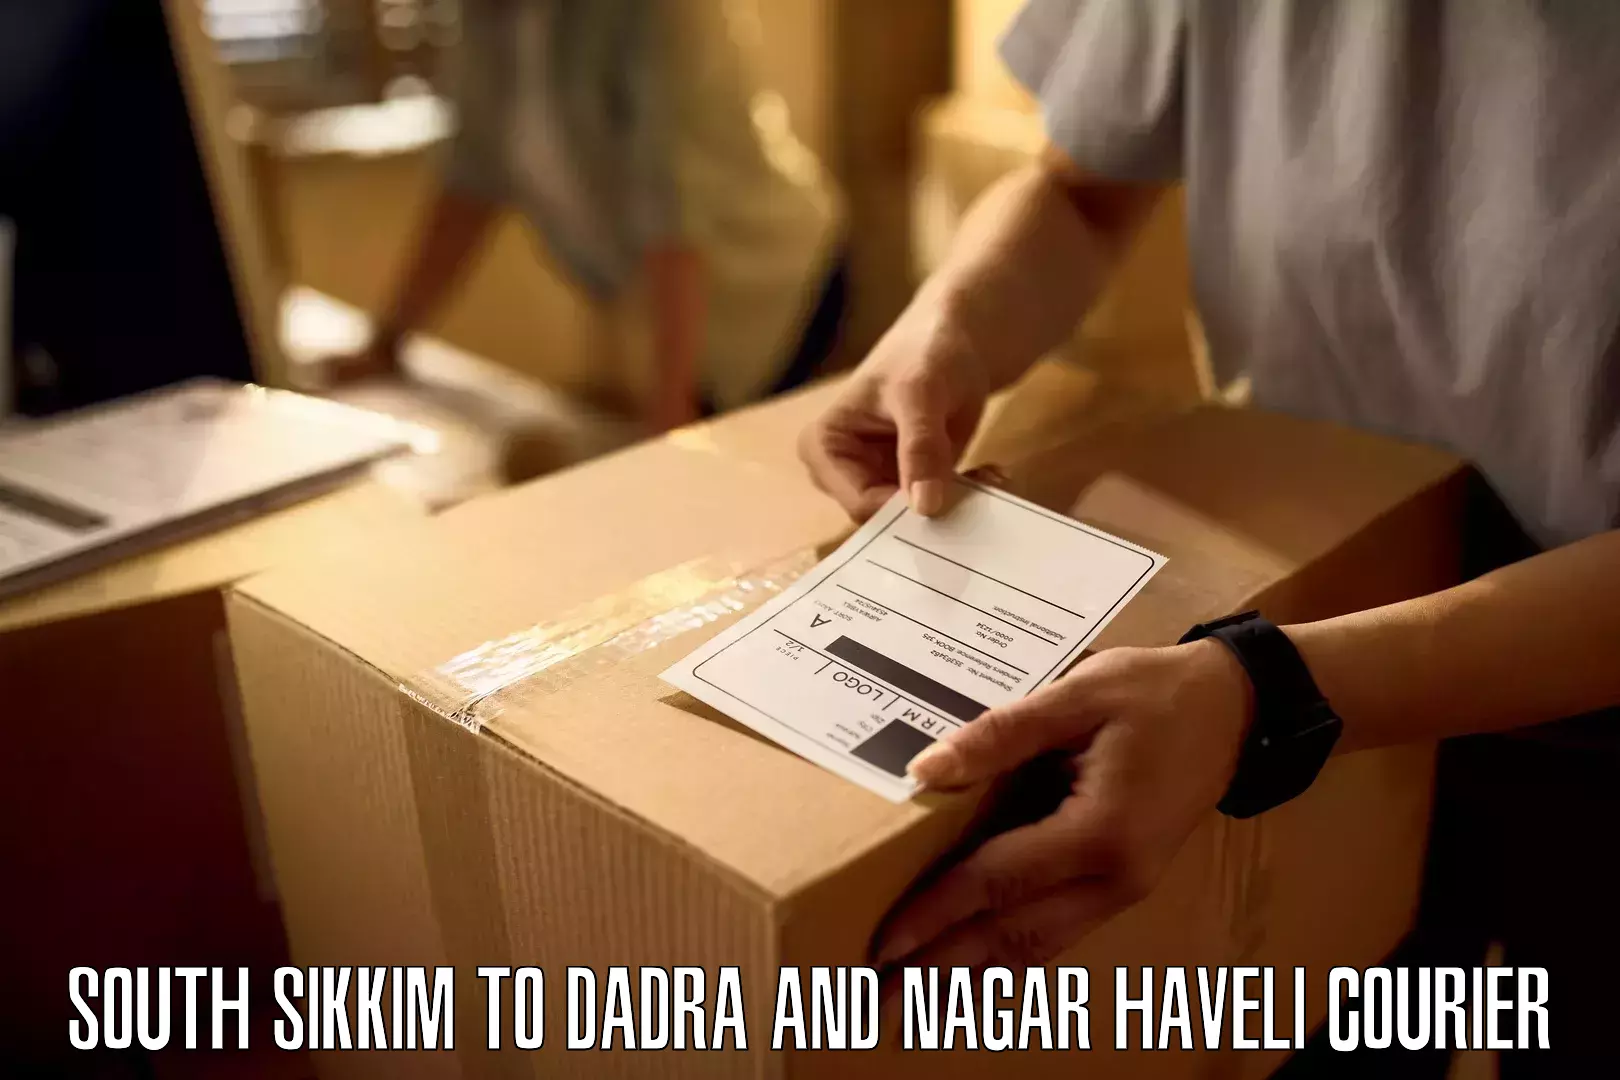 Next-day freight services South Sikkim to Dadra and Nagar Haveli